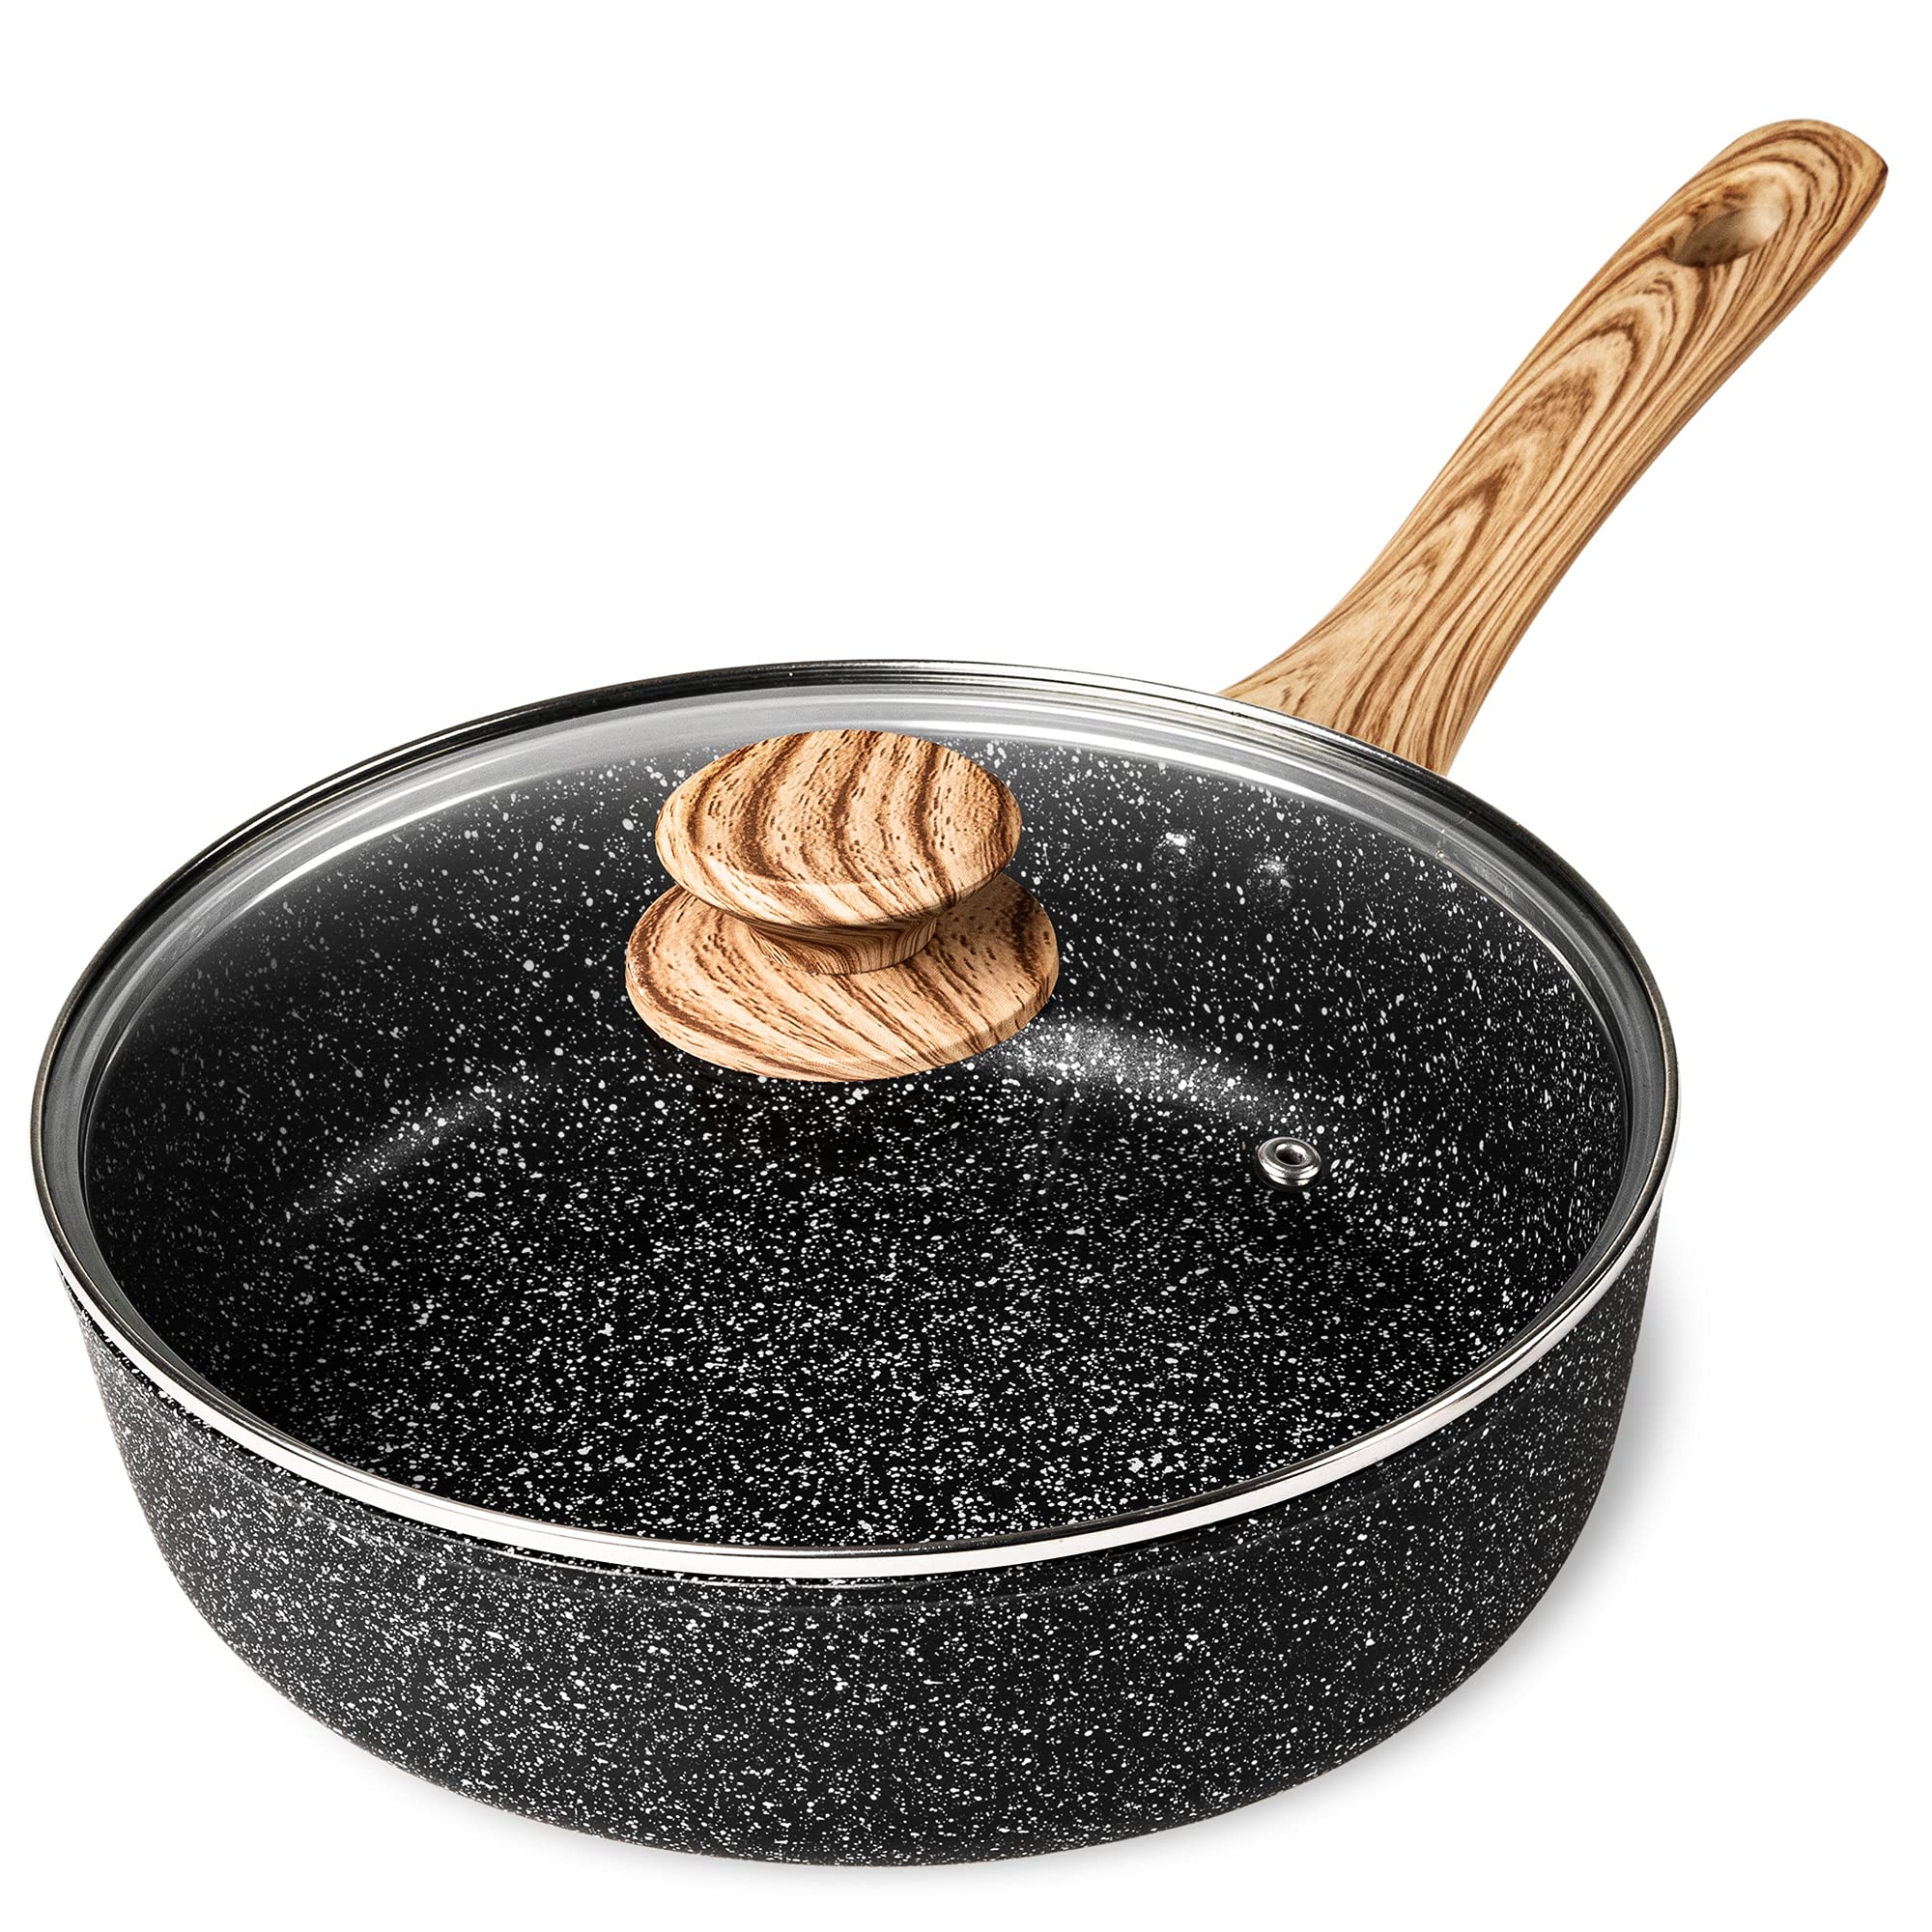 MIcHELANgELO Deep Frying Pan with Lid, 11 Inch Nonstick Pan for cooking, Deep Skillet with Lid Non Stick Frying Pan, Saute Pan N